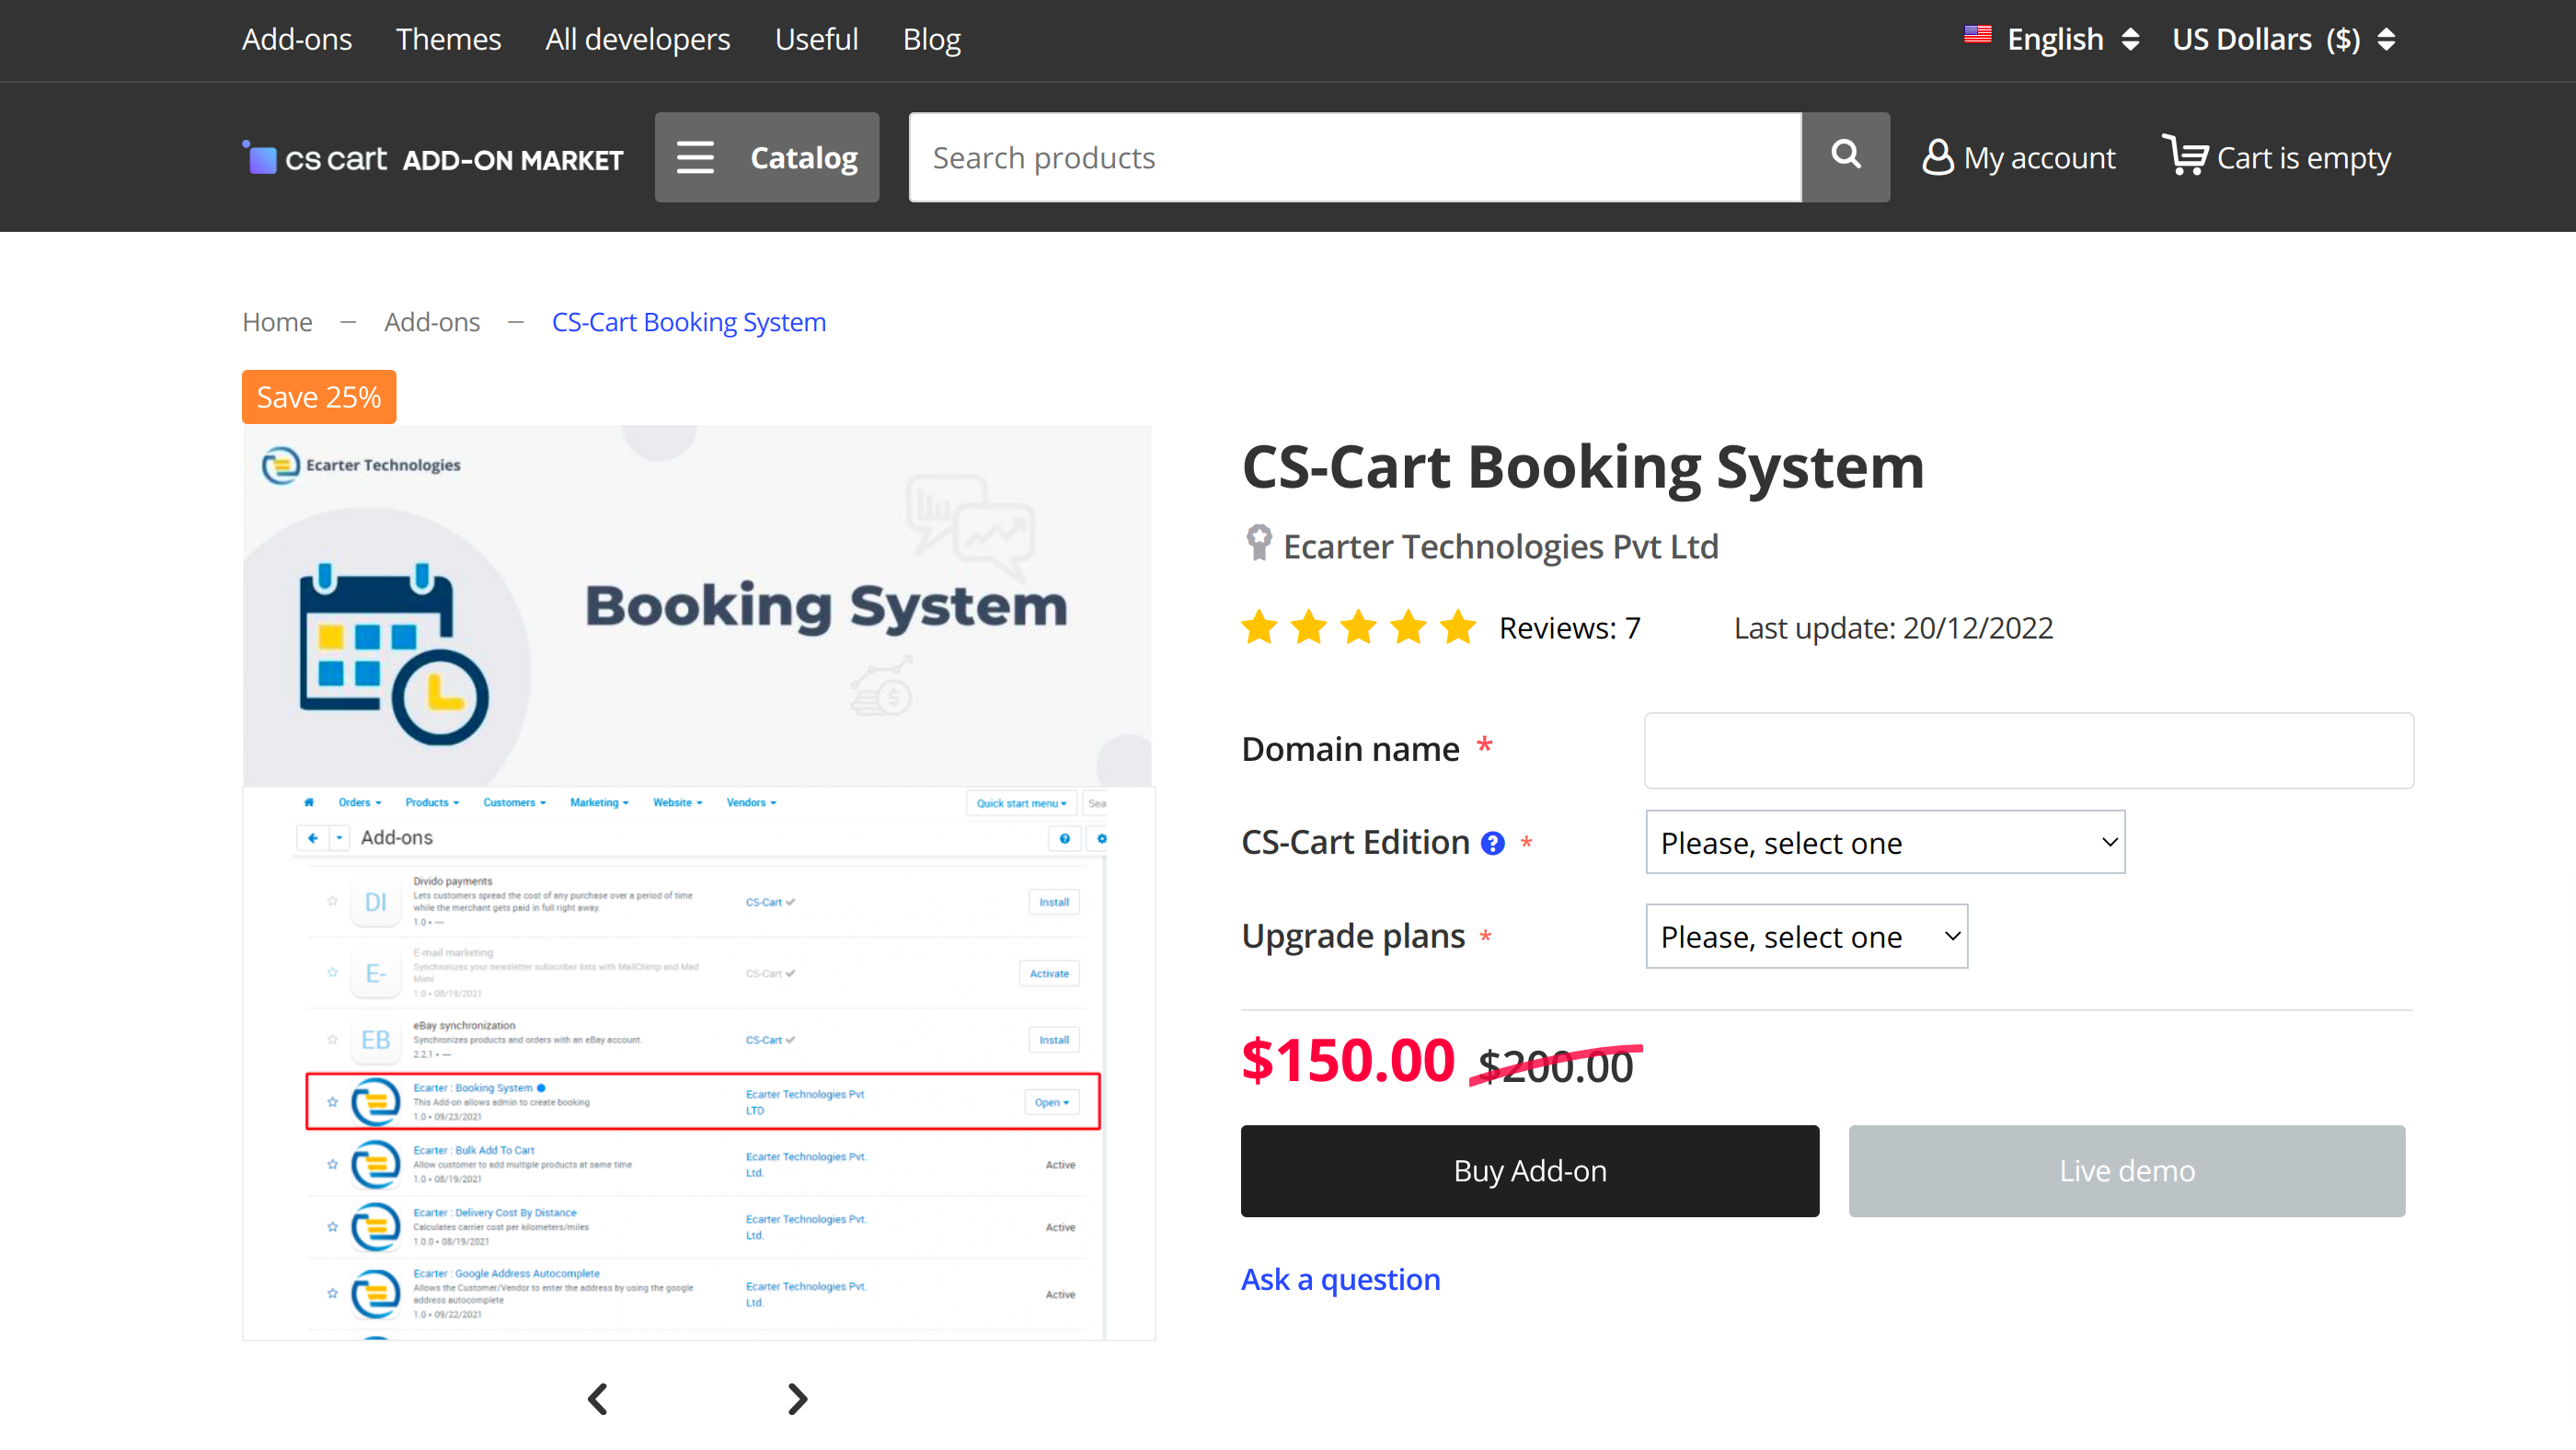 CS-Cart Booking System add-on on the Market.